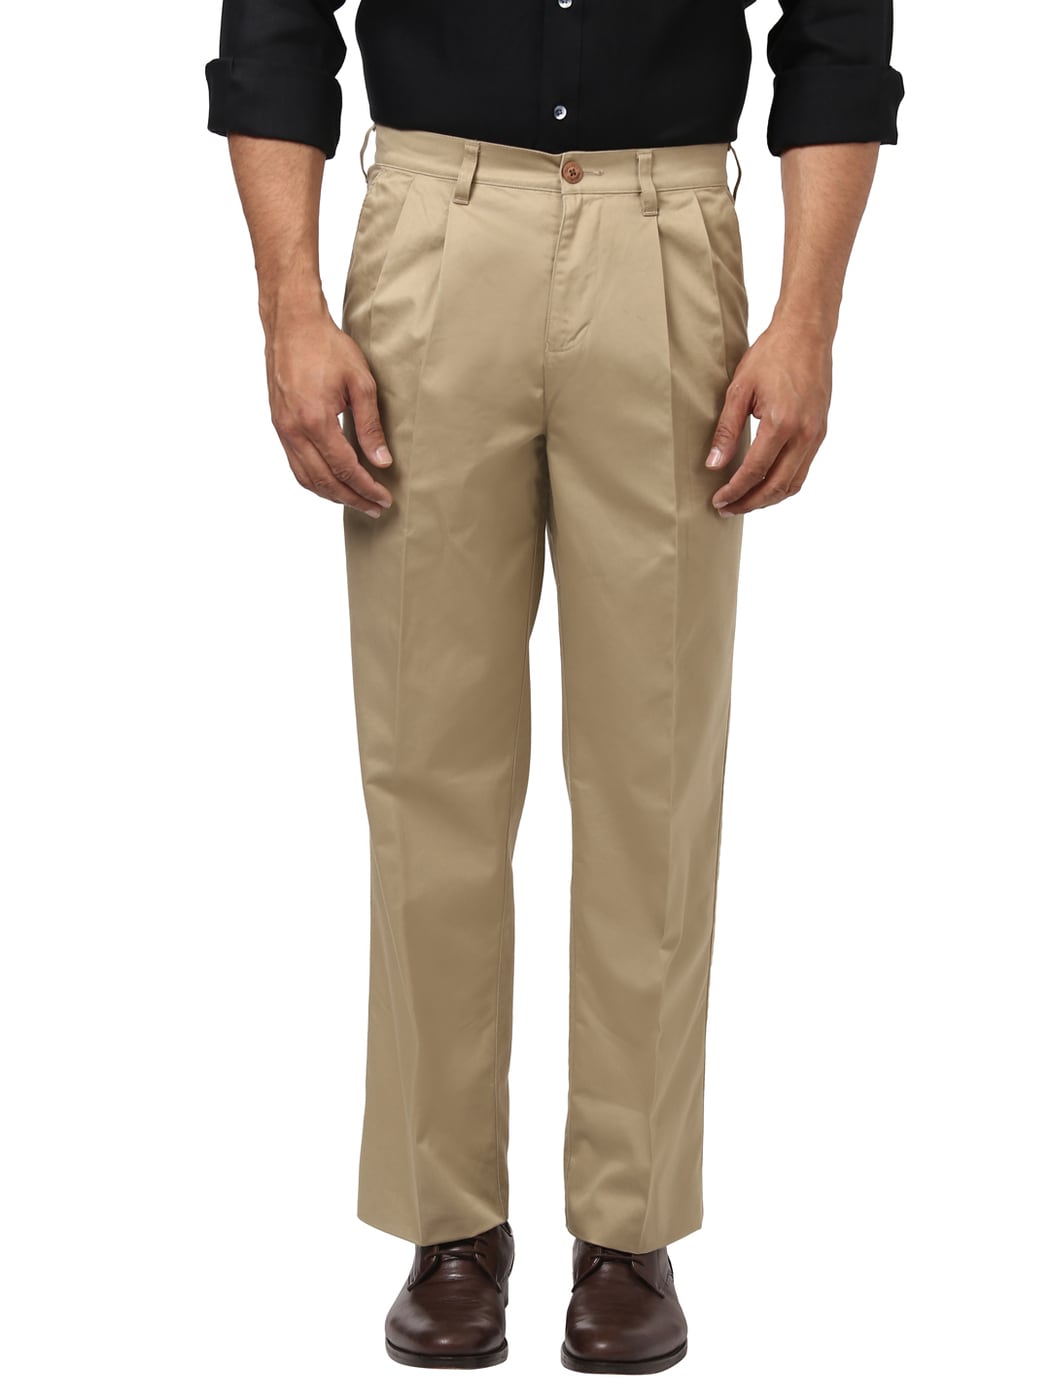 Buy Cream Trousers & Pants for Men by Colorplus Online | Ajio.com-totobed.com.vn